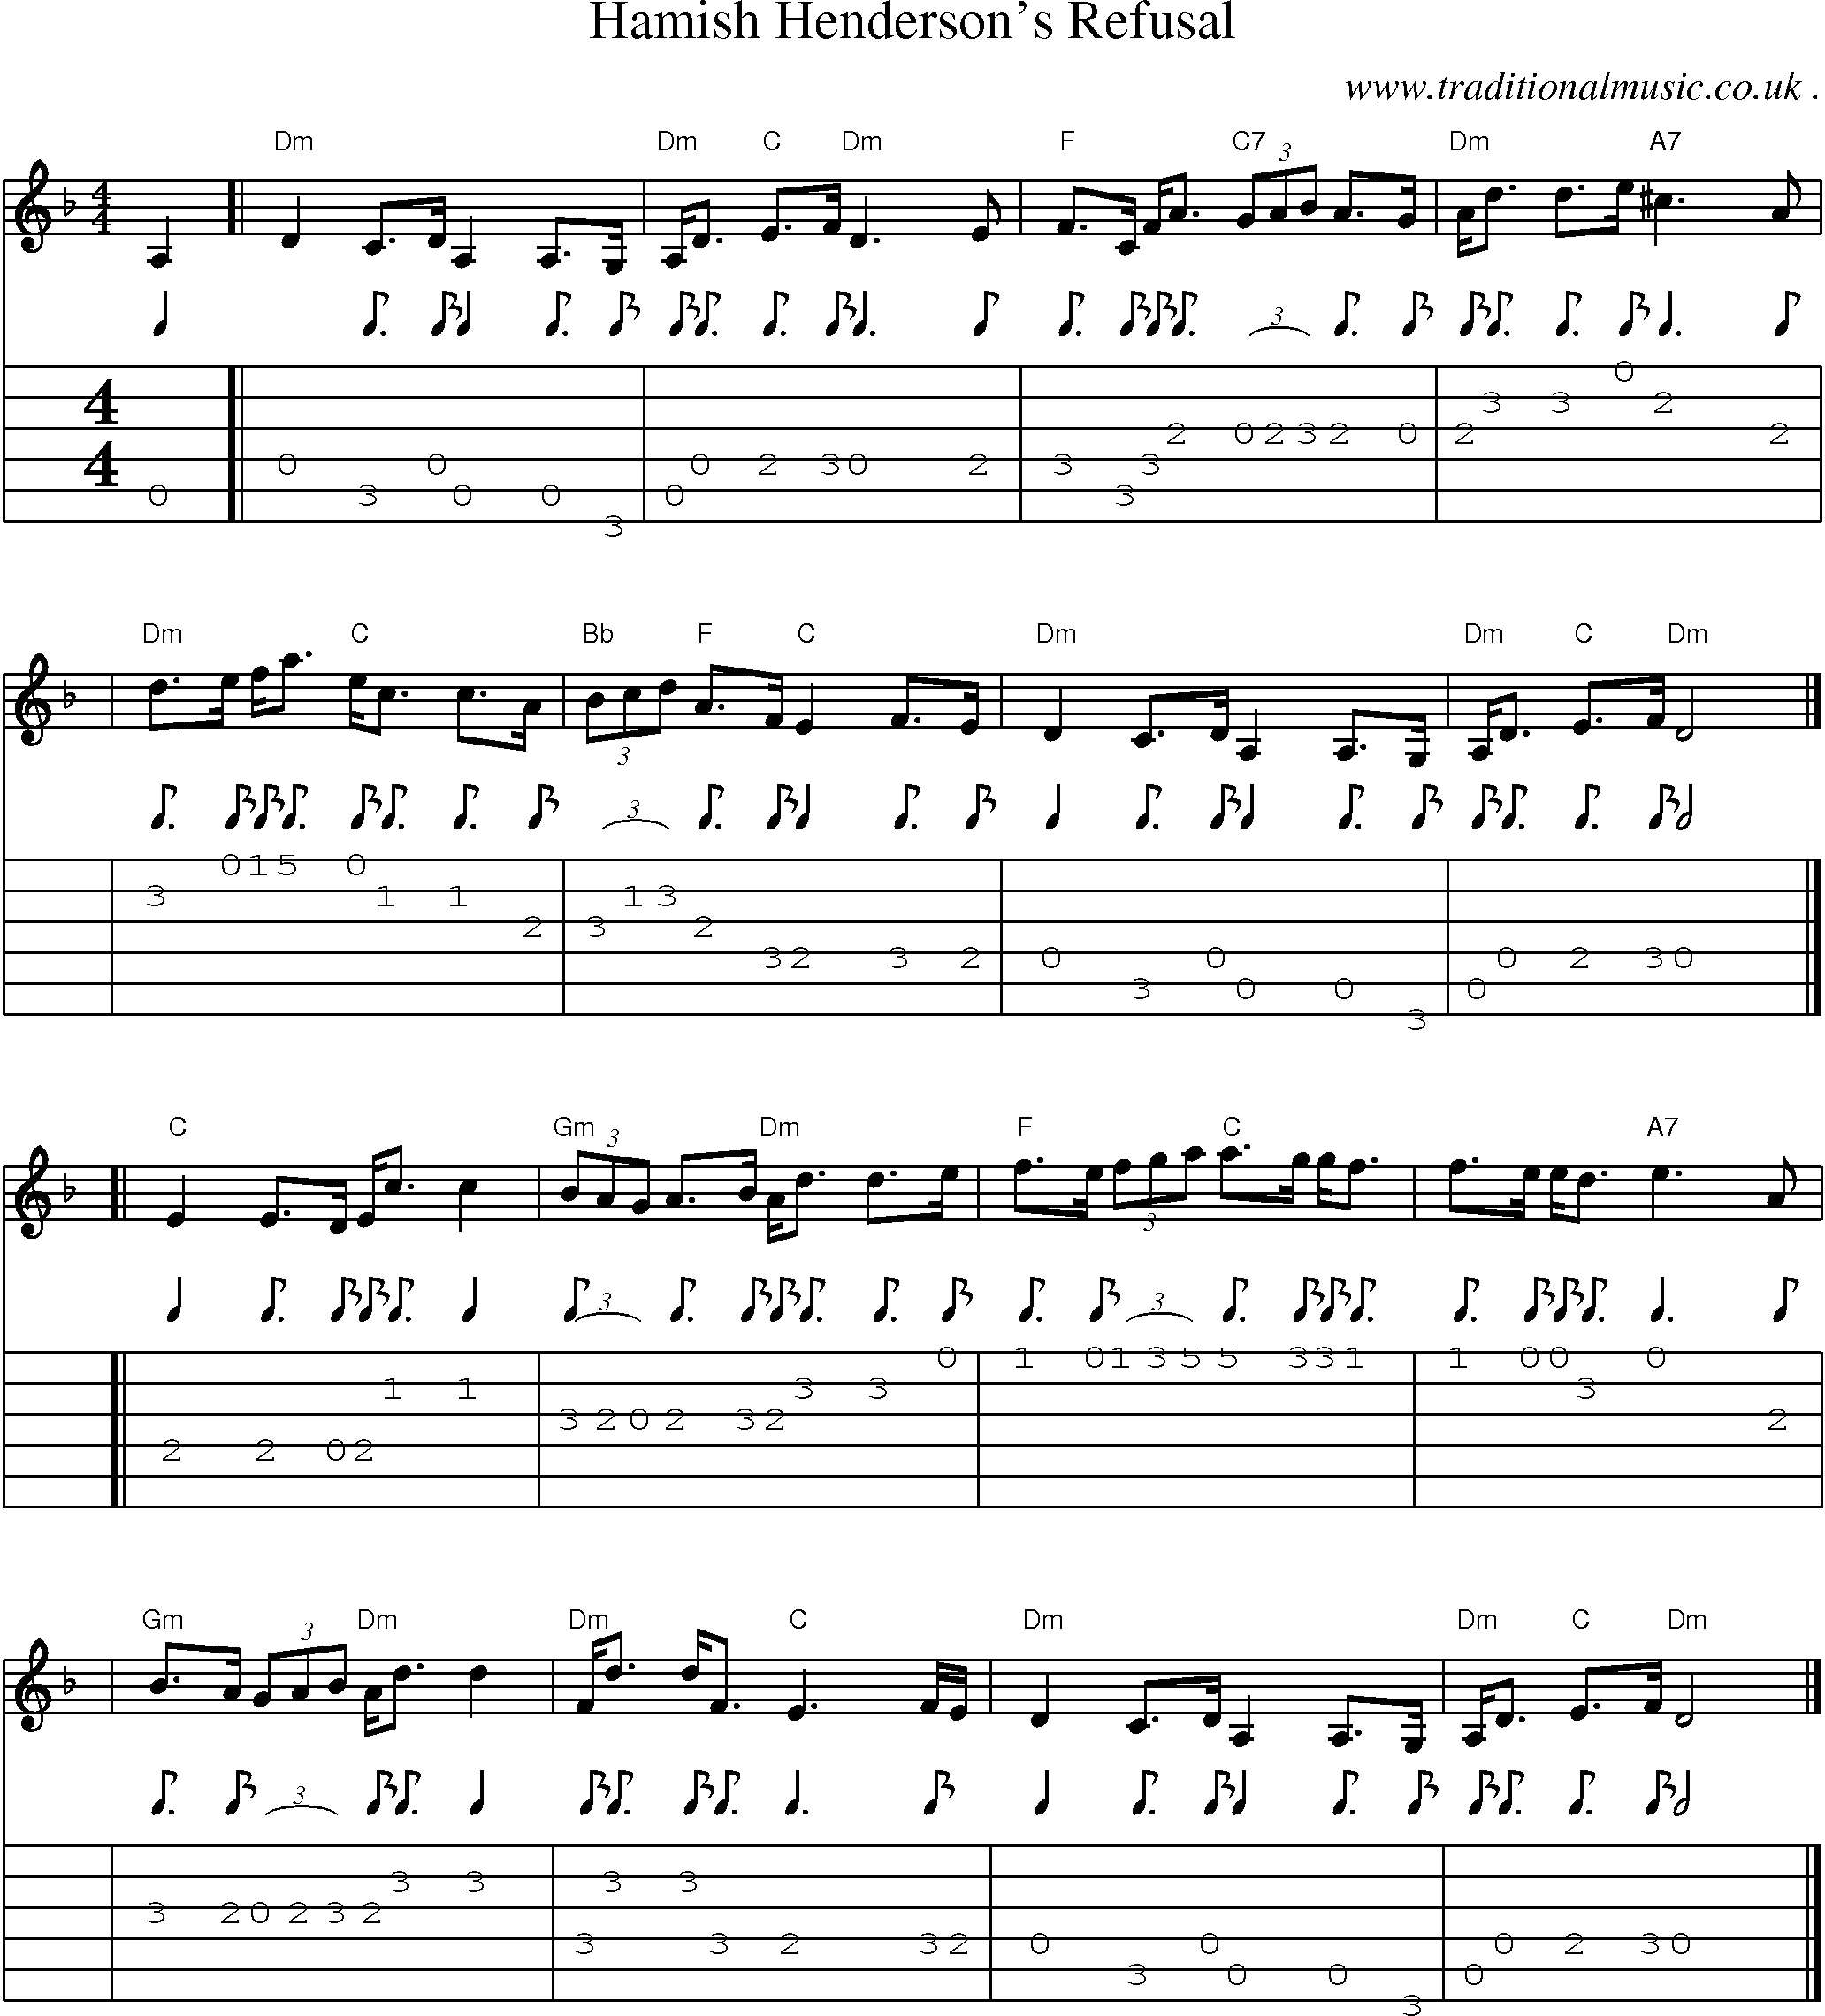 Sheet-music  score, Chords and Guitar Tabs for Hamish Hendersons Refusal